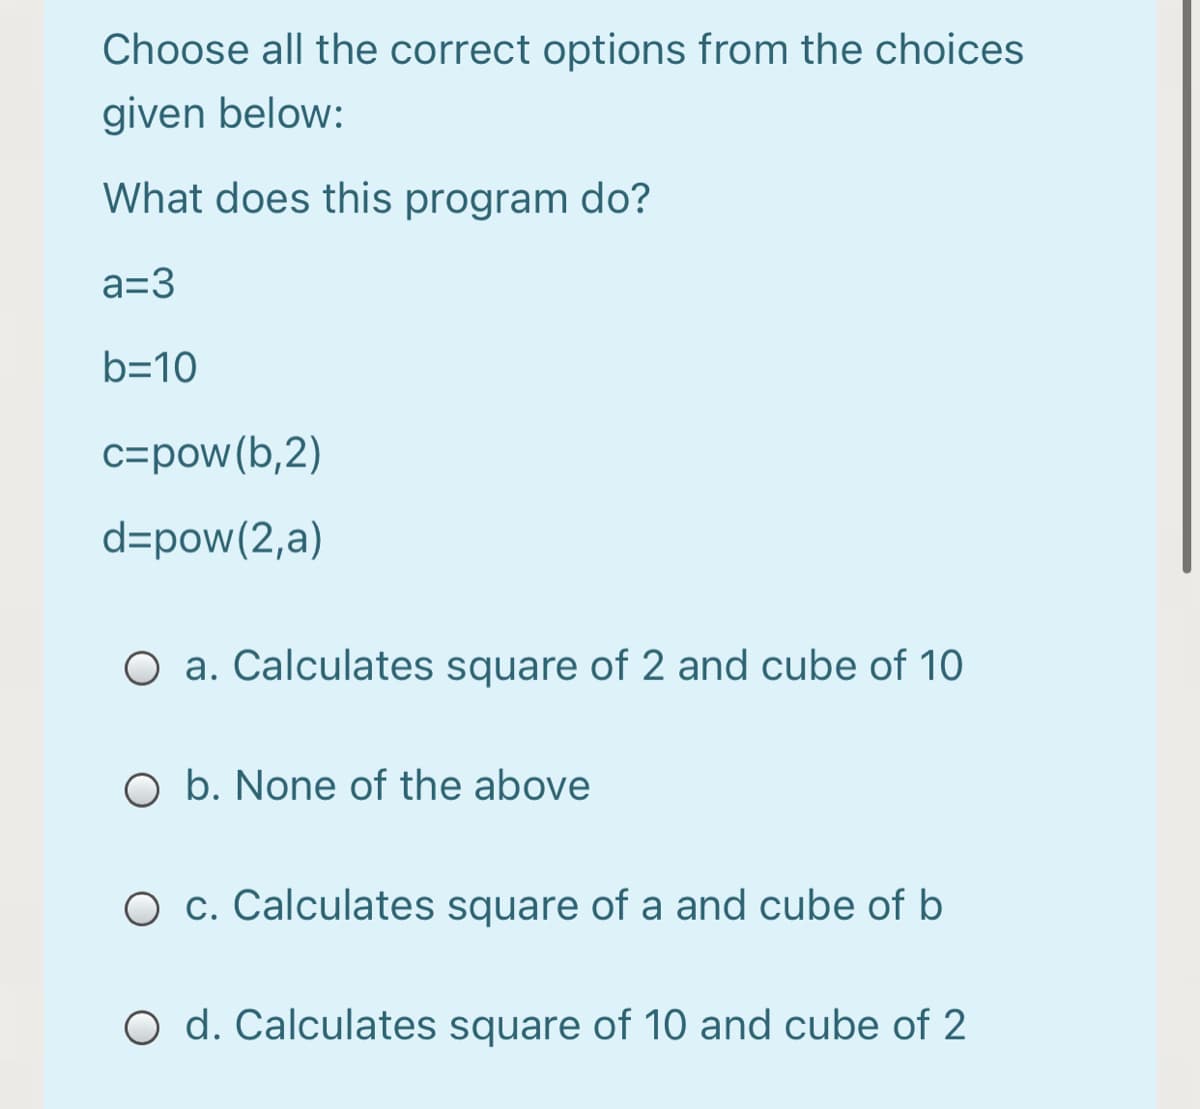 Choose all the correct options from the choices
given below:
What does this program do?
a=3
b=10
c=pow(b,2)
d=pow(2,a)
O a. Calculates square of 2 and cube of 10
O b. None of the above
O c. Calculates square of a and cube of b
O d. Calculates square of 10 and cube of 2
